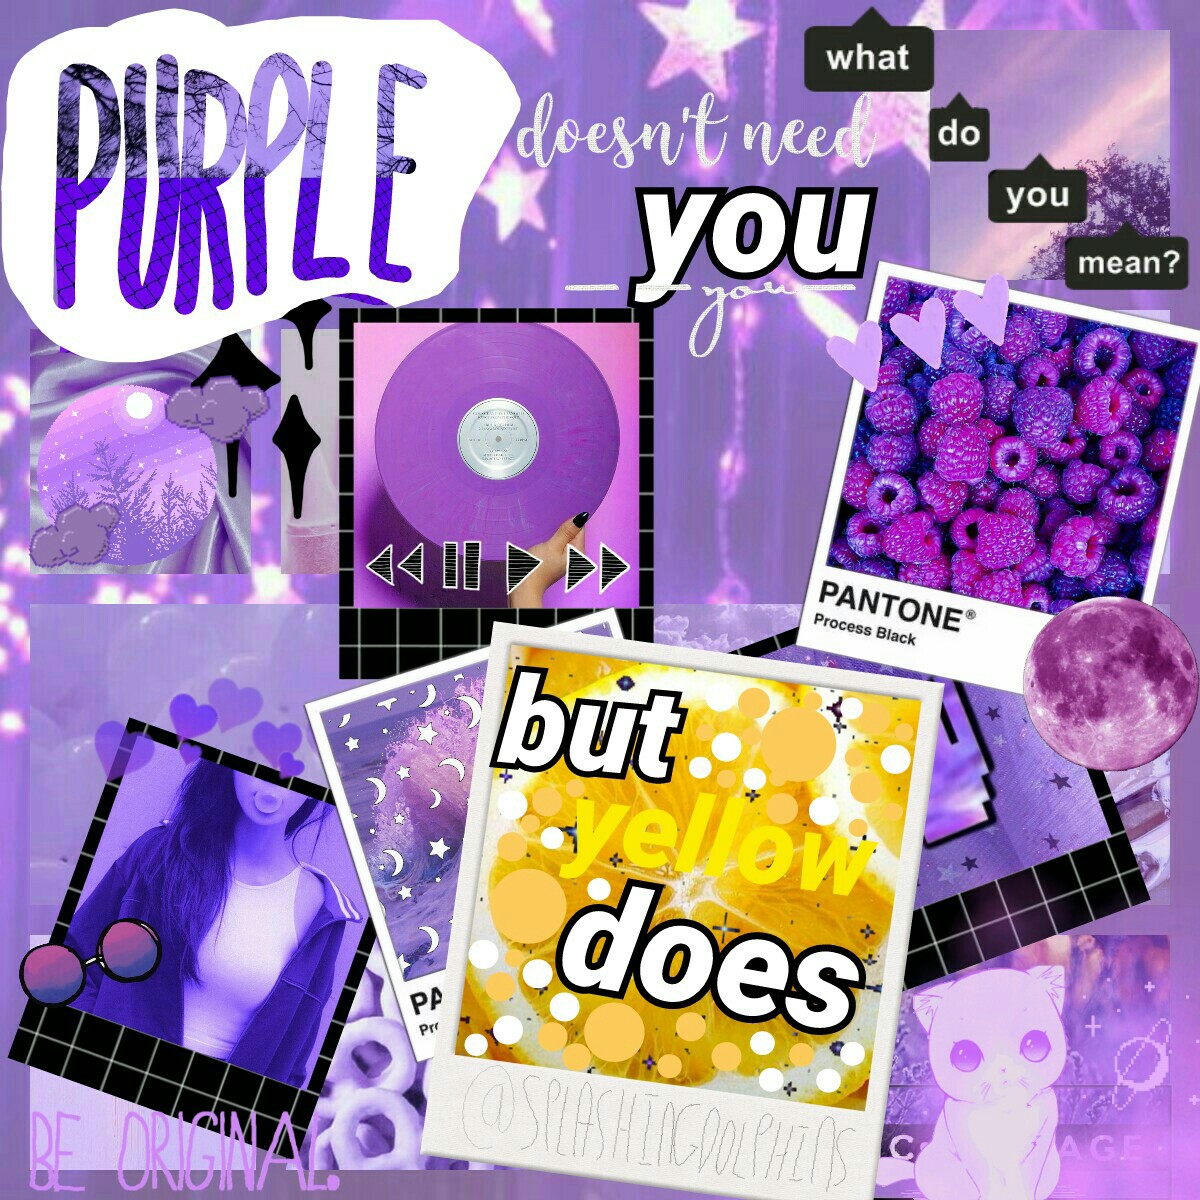 🍇 tap for more! 🍇

here's a purple collage! this took super long, (idk why) and i actually kinda like it! i put the yellow there to draw the eye to that part. it's pretty complicated, and i look forwards to doing more things like this!